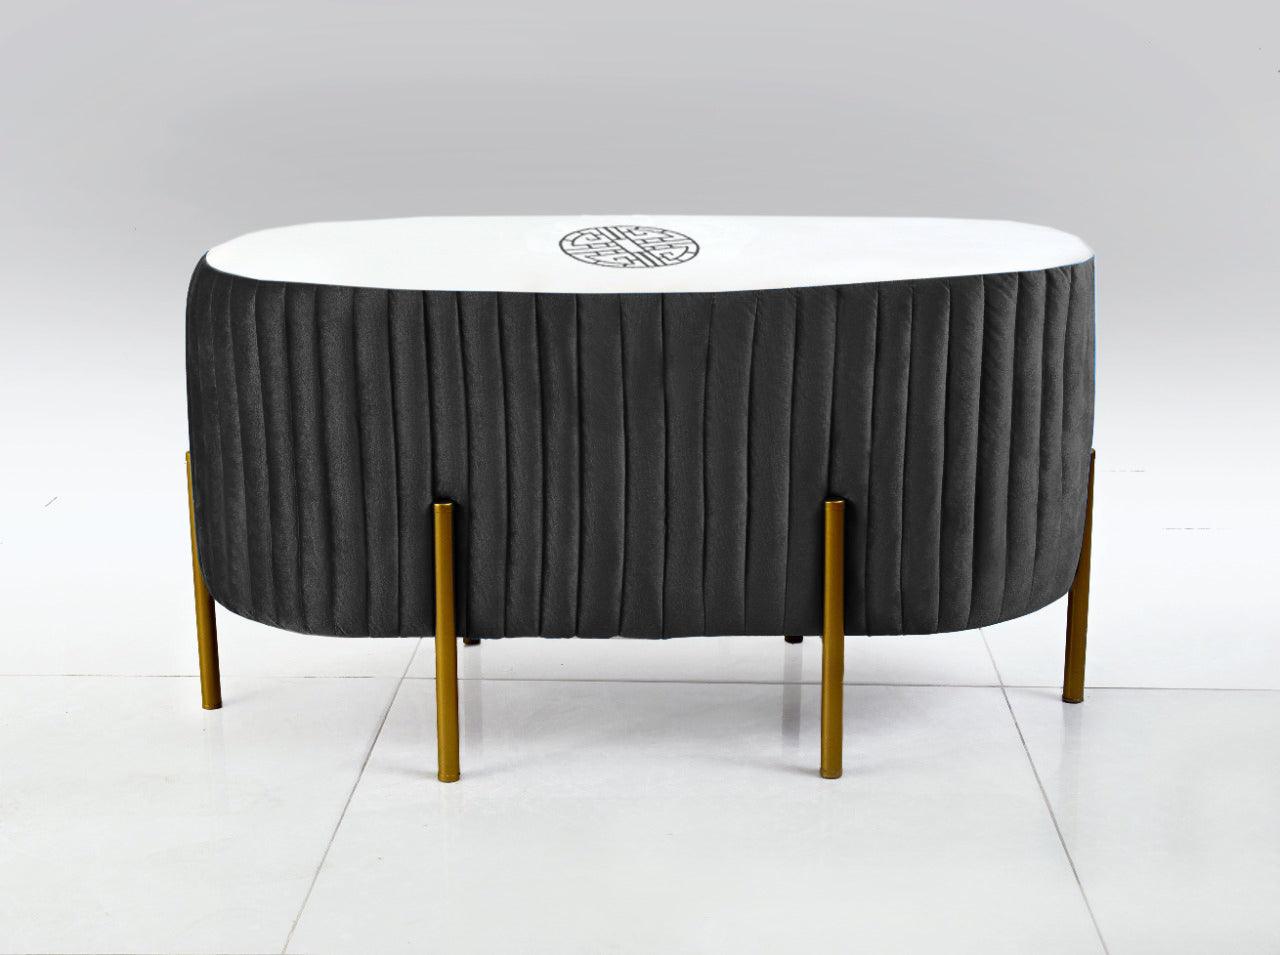 2 SEATER LUXURY EMBROIDERED VELVET STOOL WITH STEEL STAND-890 - 92Bedding